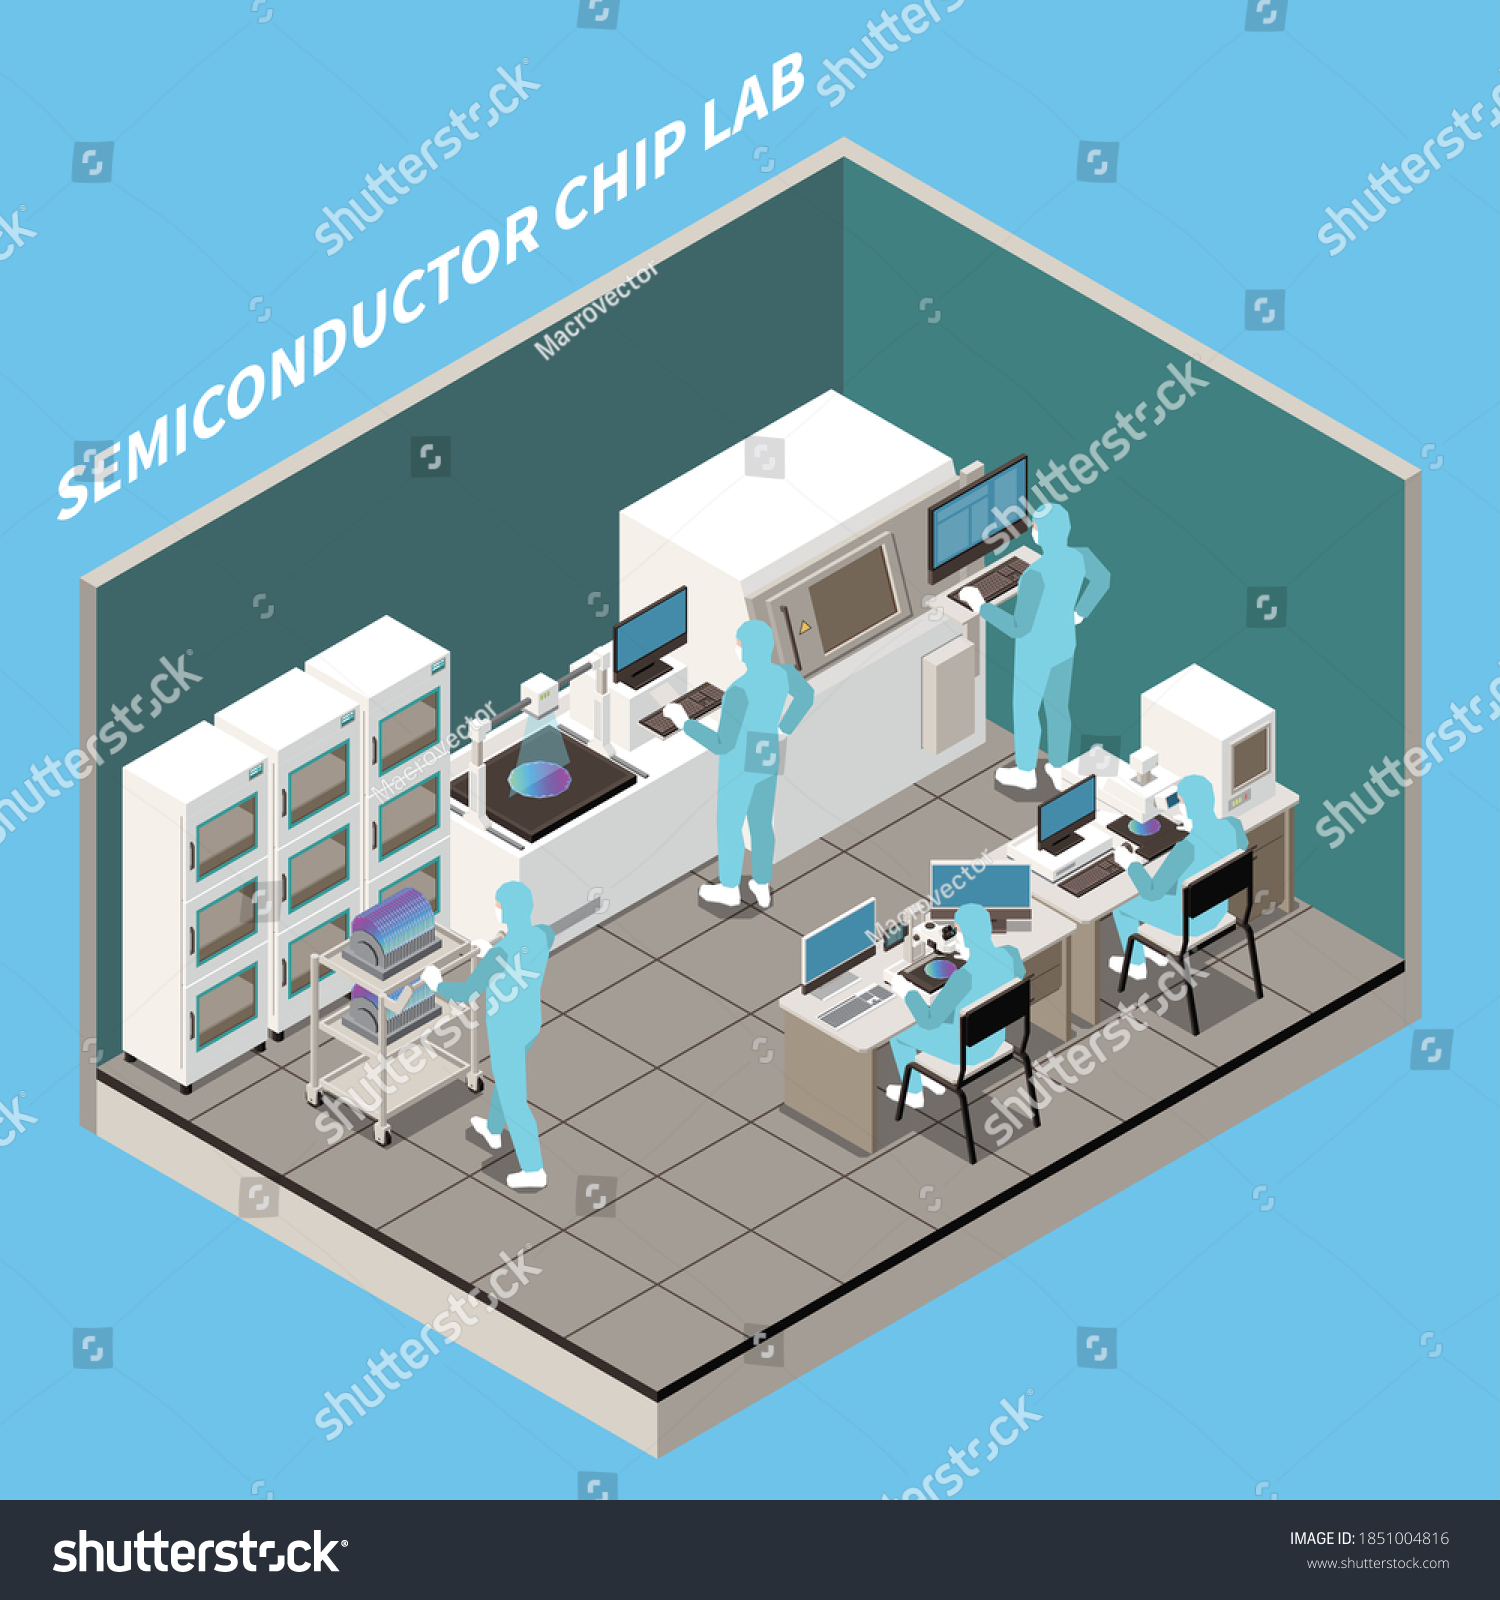 SVG of Semiconductor chip production isometric composition with text and indoor view of laboratory with workers and machinery vector illustration svg